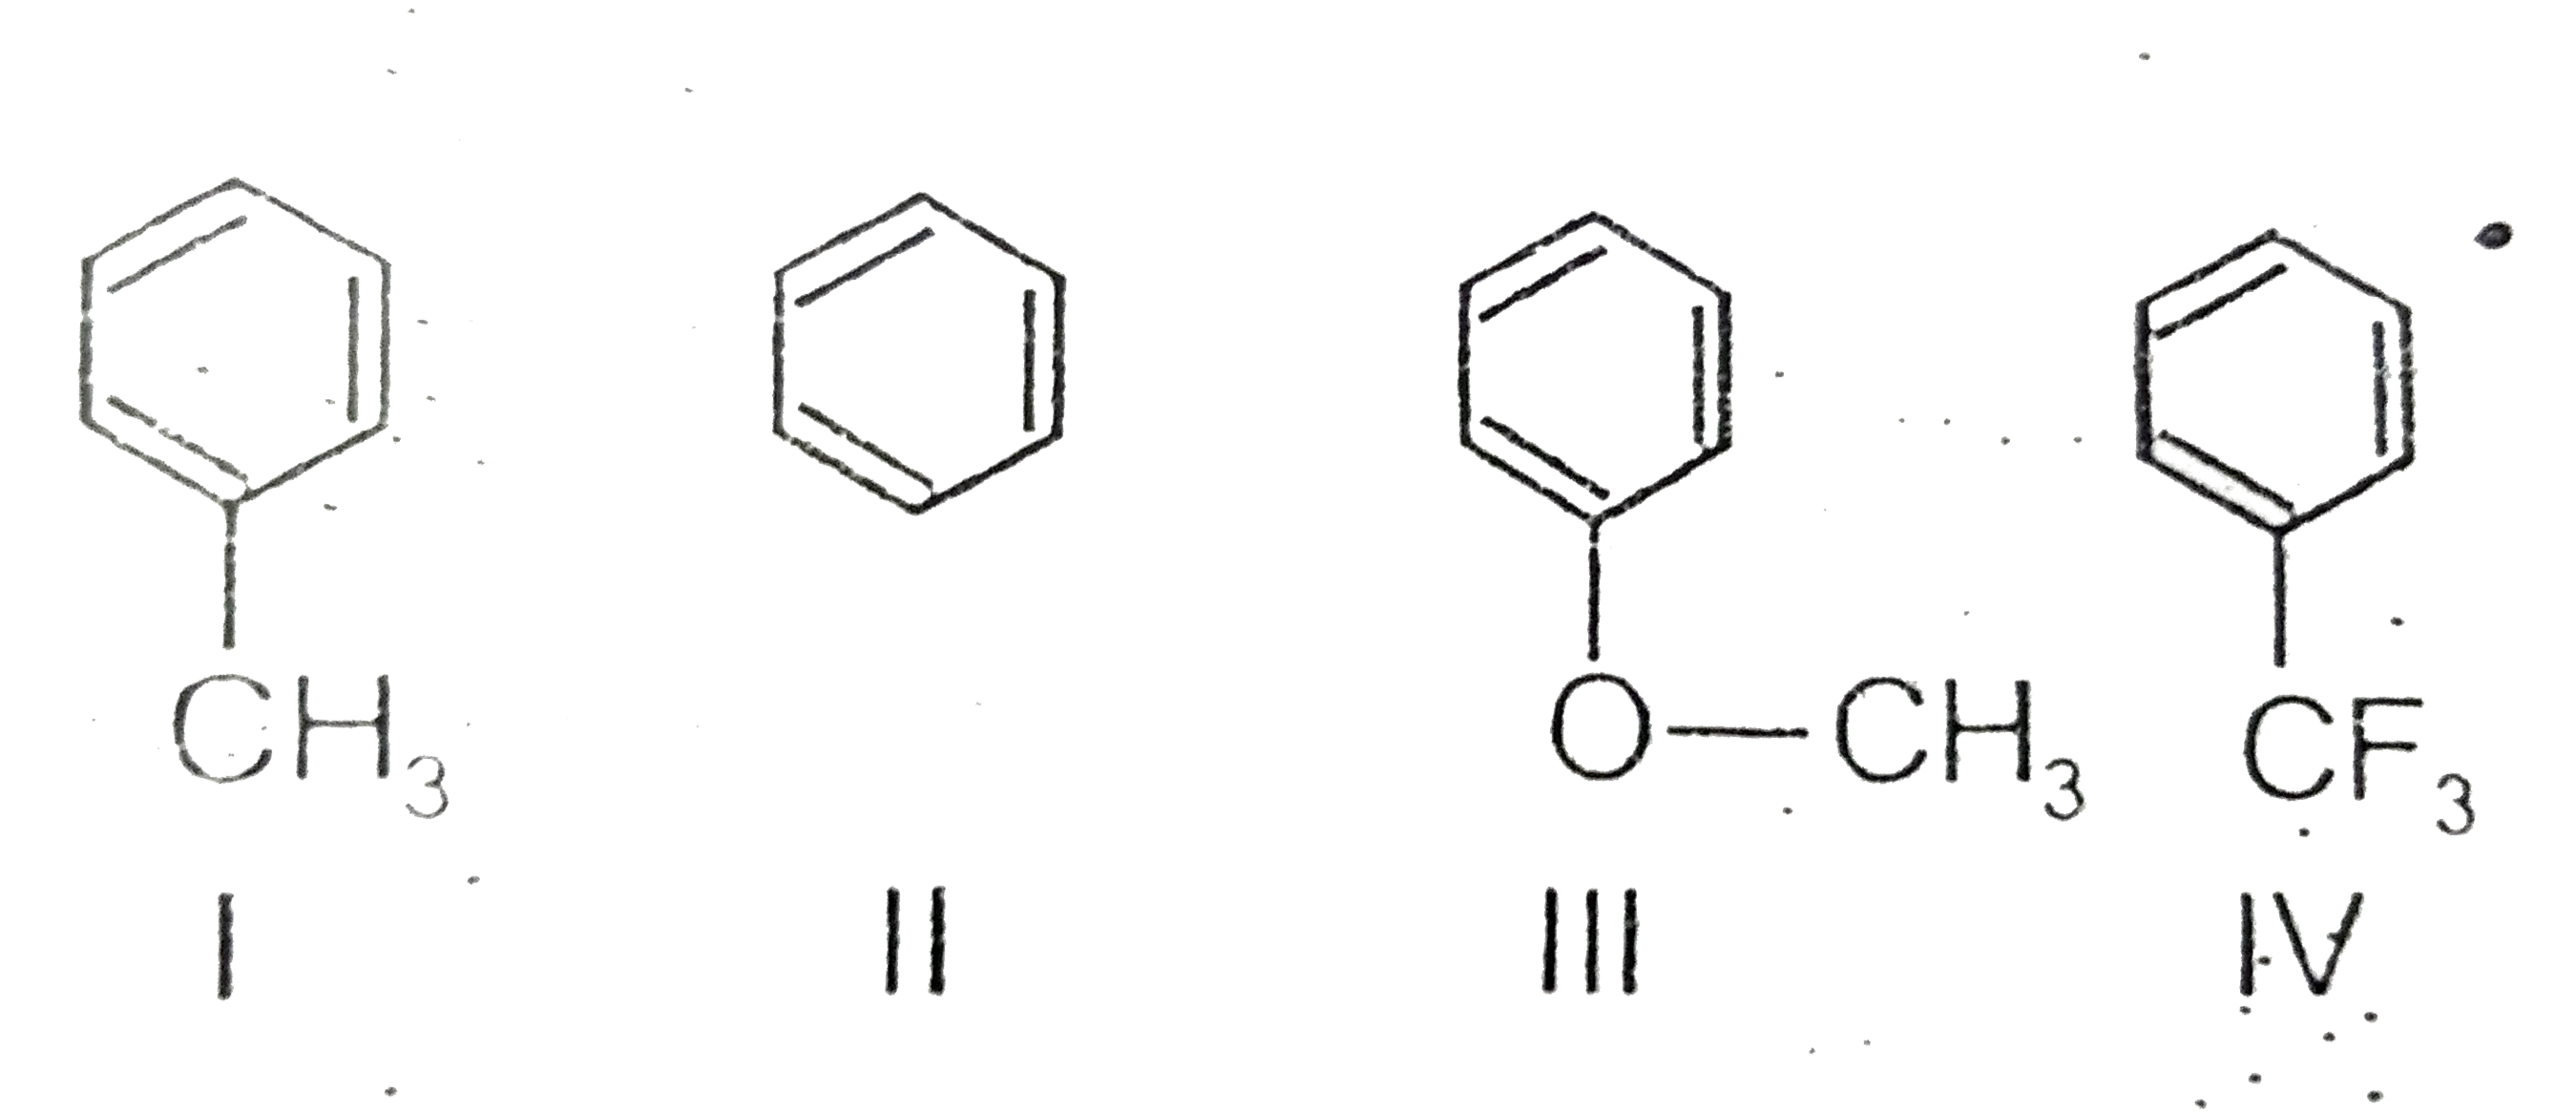 Among the following compounds, the decreasing order of reactivity towards electrophilic substitution is